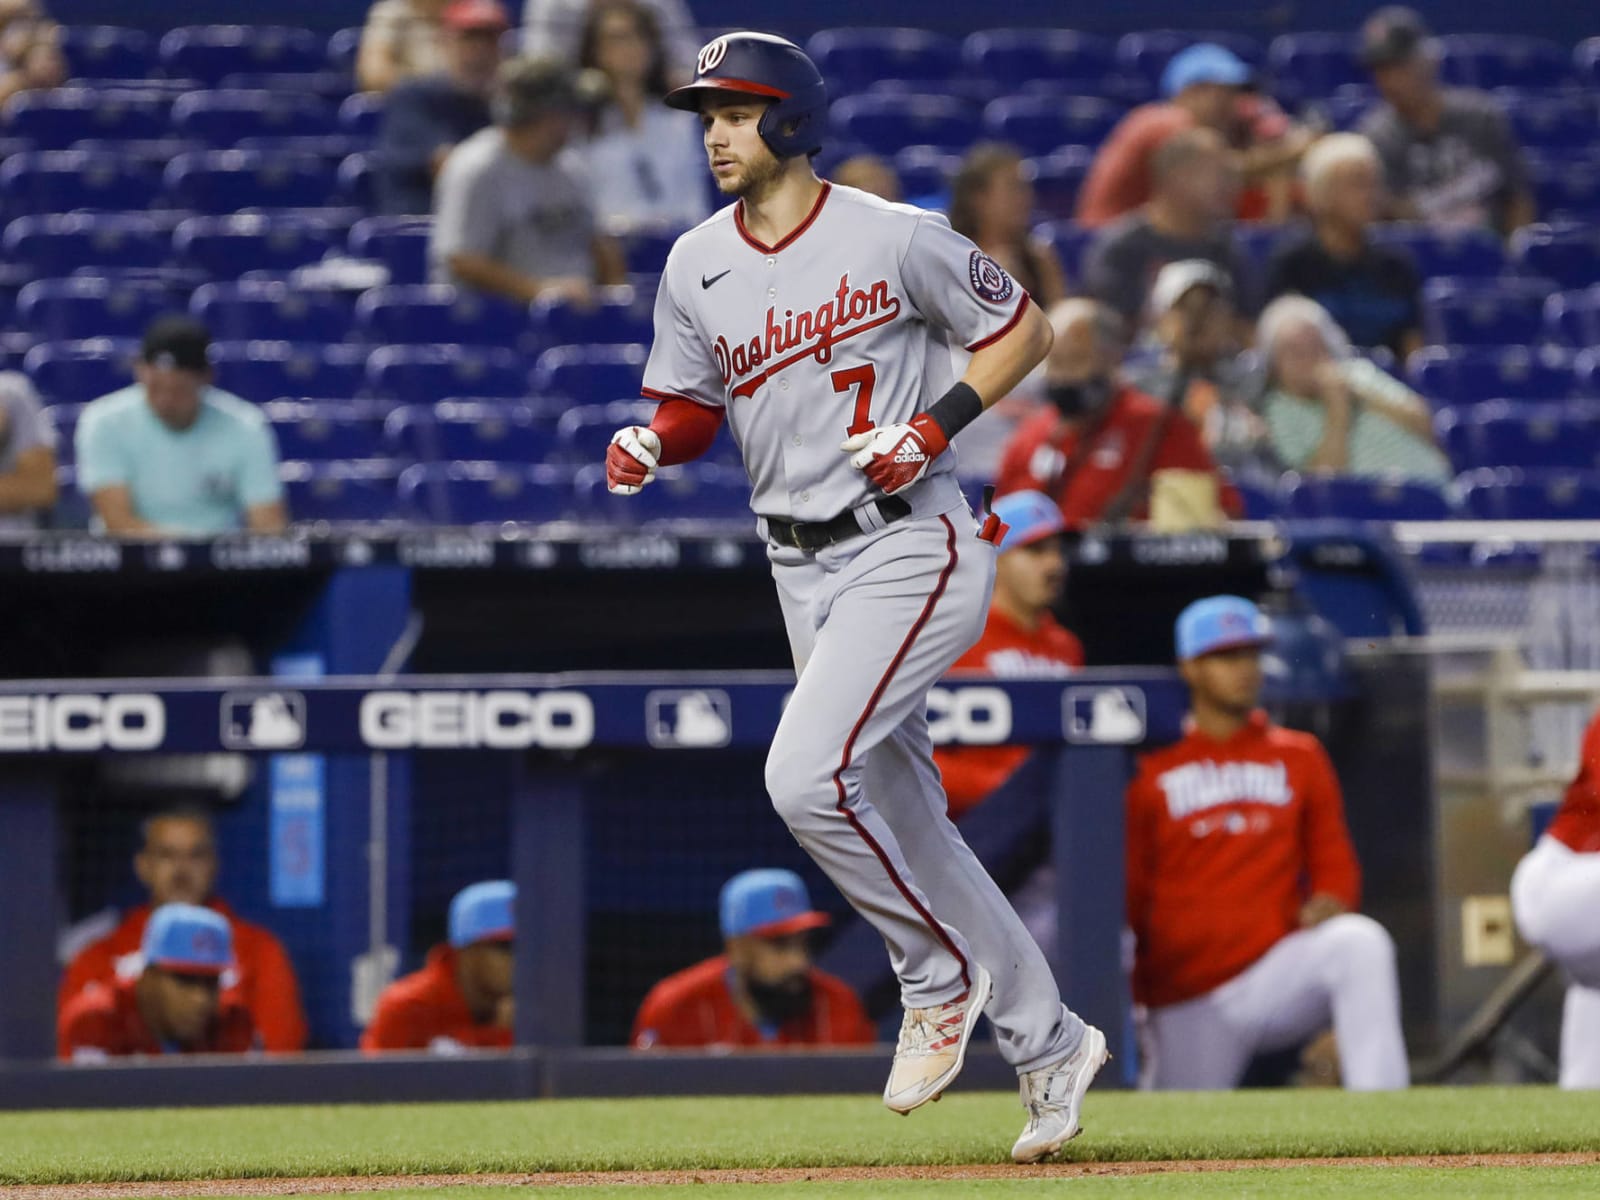 Not a folktale: Washington Nationals' Trea Turner really is that